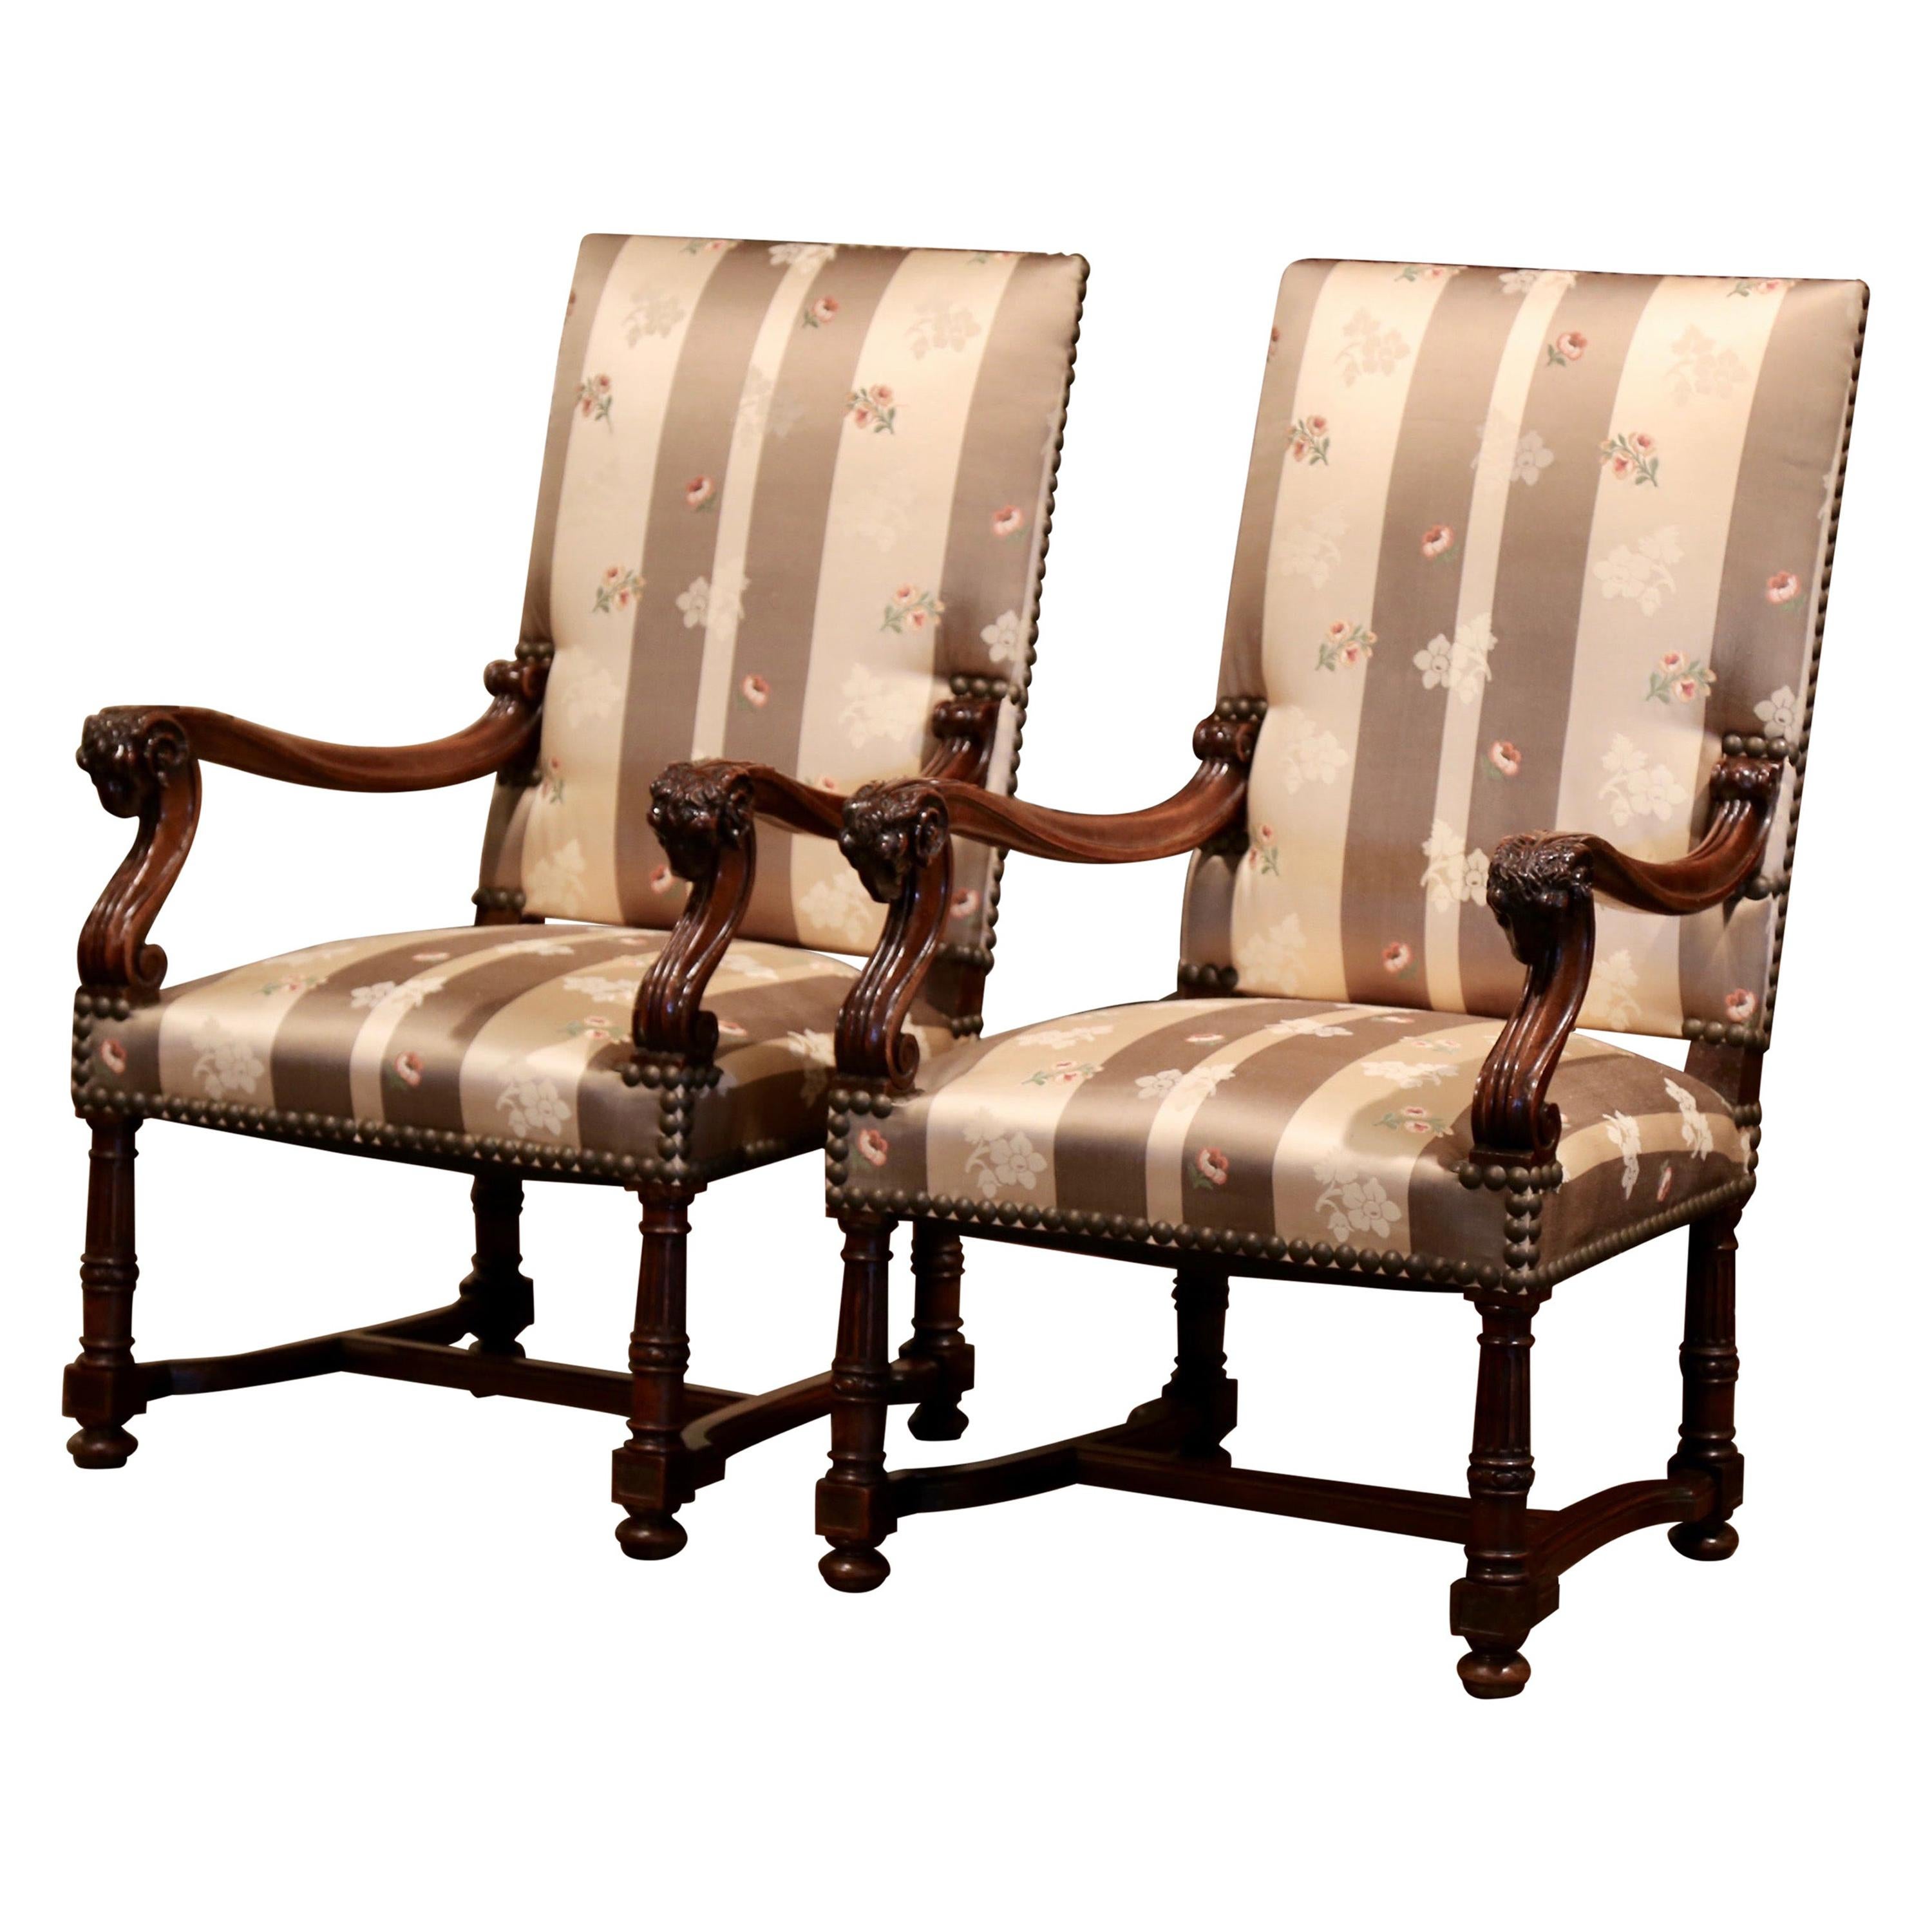 Pair of 19th Century French Louis XIII Carved Walnut Armchairs with Ram Decor